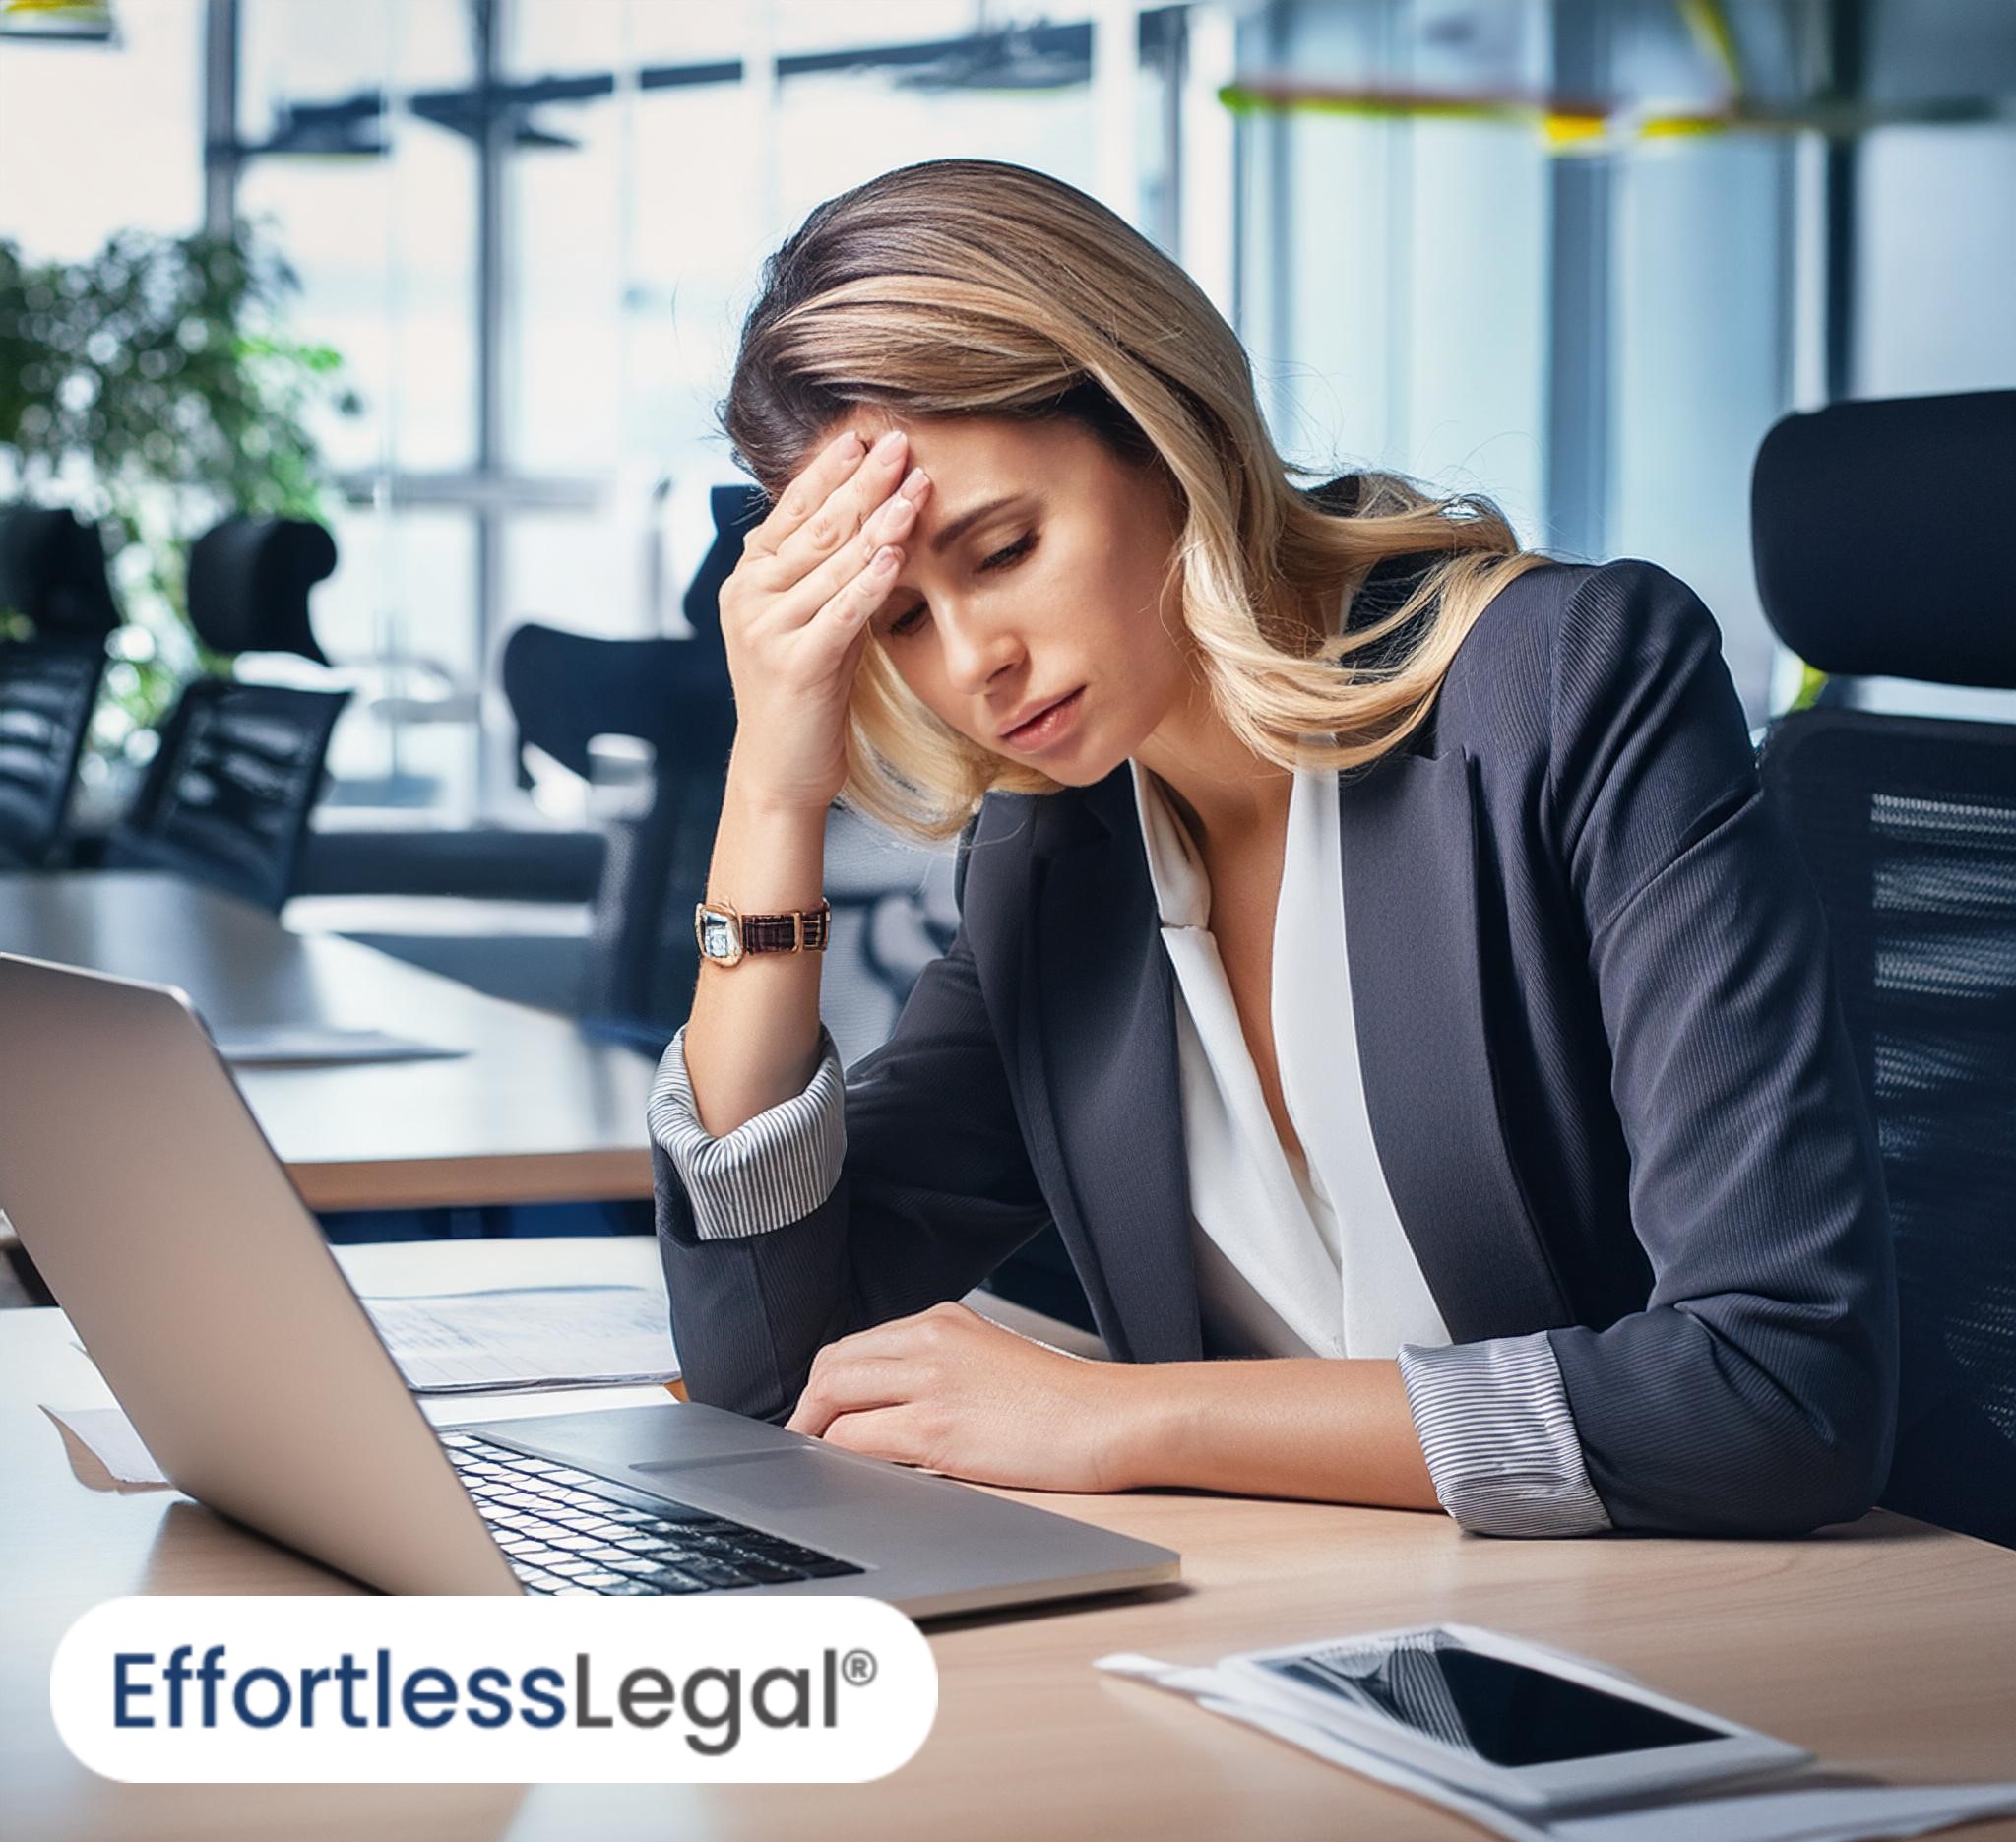 Stress Management for Lawyers